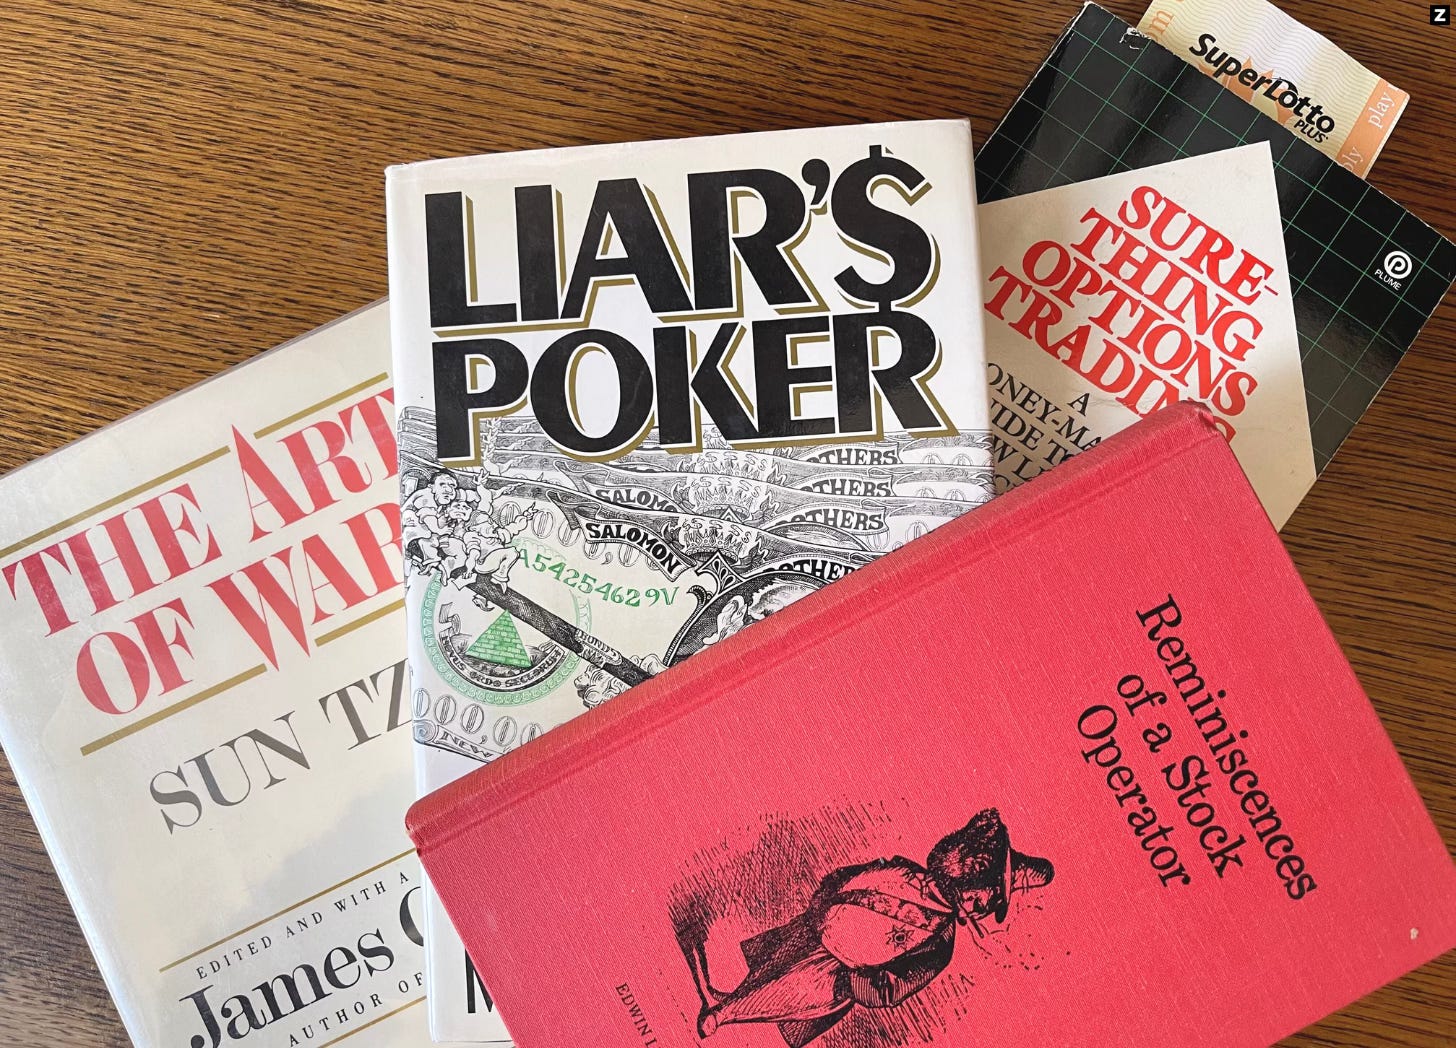 Liar's Poker - Annie Logue must reads - Tom Levine, Native Angelino Podcast - Los Angeles, CA